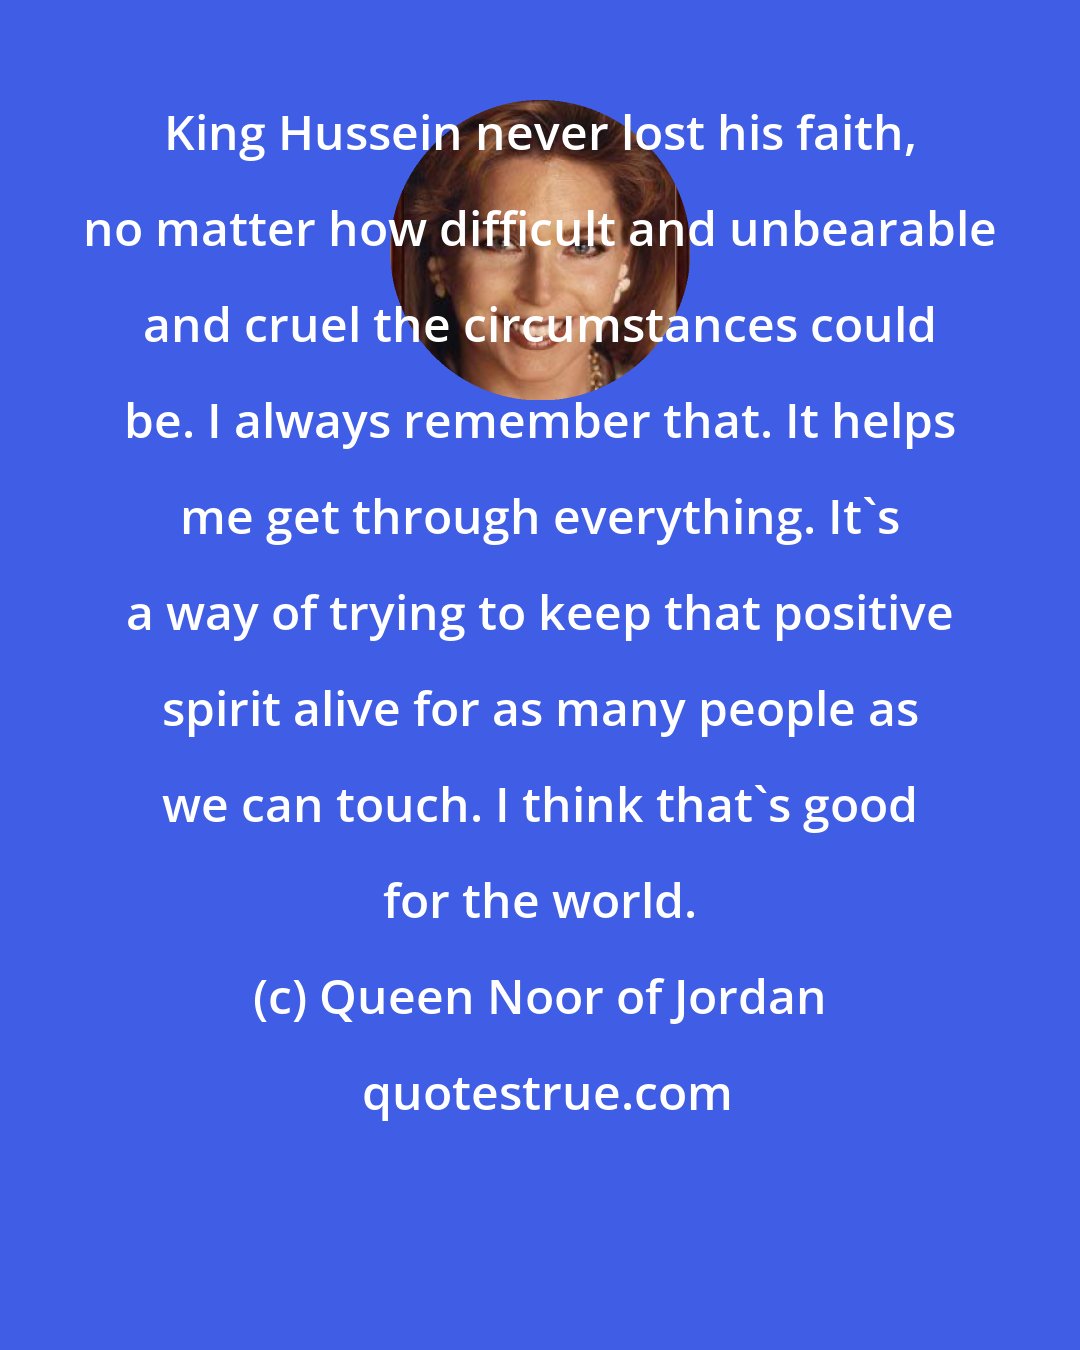 Queen Noor of Jordan: King Hussein never lost his faith, no matter how difficult and unbearable and cruel the circumstances could be. I always remember that. It helps me get through everything. It's a way of trying to keep that positive spirit alive for as many people as we can touch. I think that's good for the world.